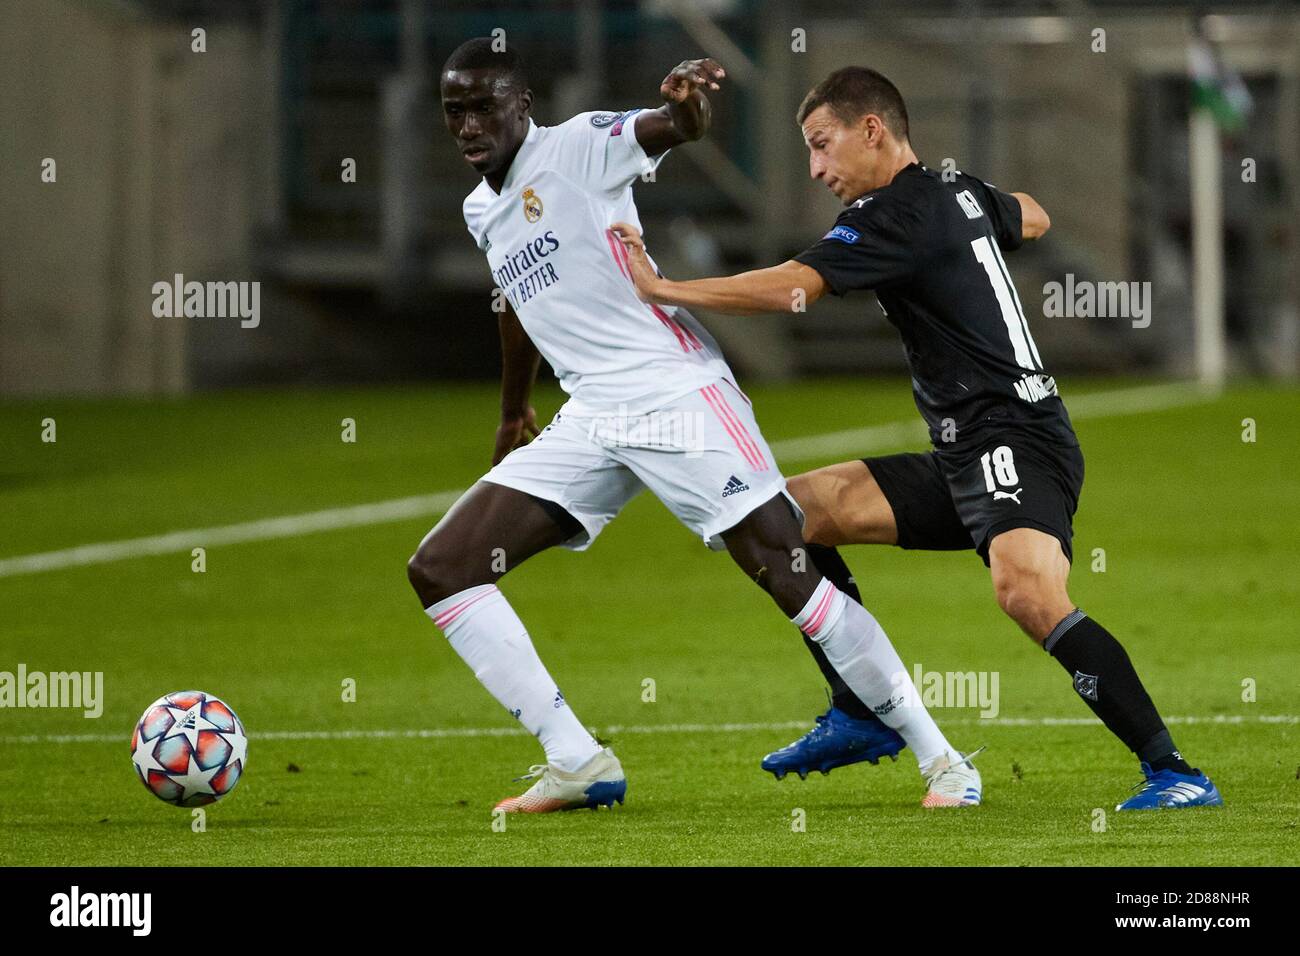 Monchengladbach, Germany. 27th Oct, 2020. Ferland Mendy of Real Madrid in action with Stefan Lainer of Borussia Monchengladbach during the UEFA Champions League match between Borussia Monchengladbach and Real Madrid at Borussia-Park on October 27, 2020 in Monchengladbach, Spain. Credit: Dax Images/Alamy Live News Stock Photo